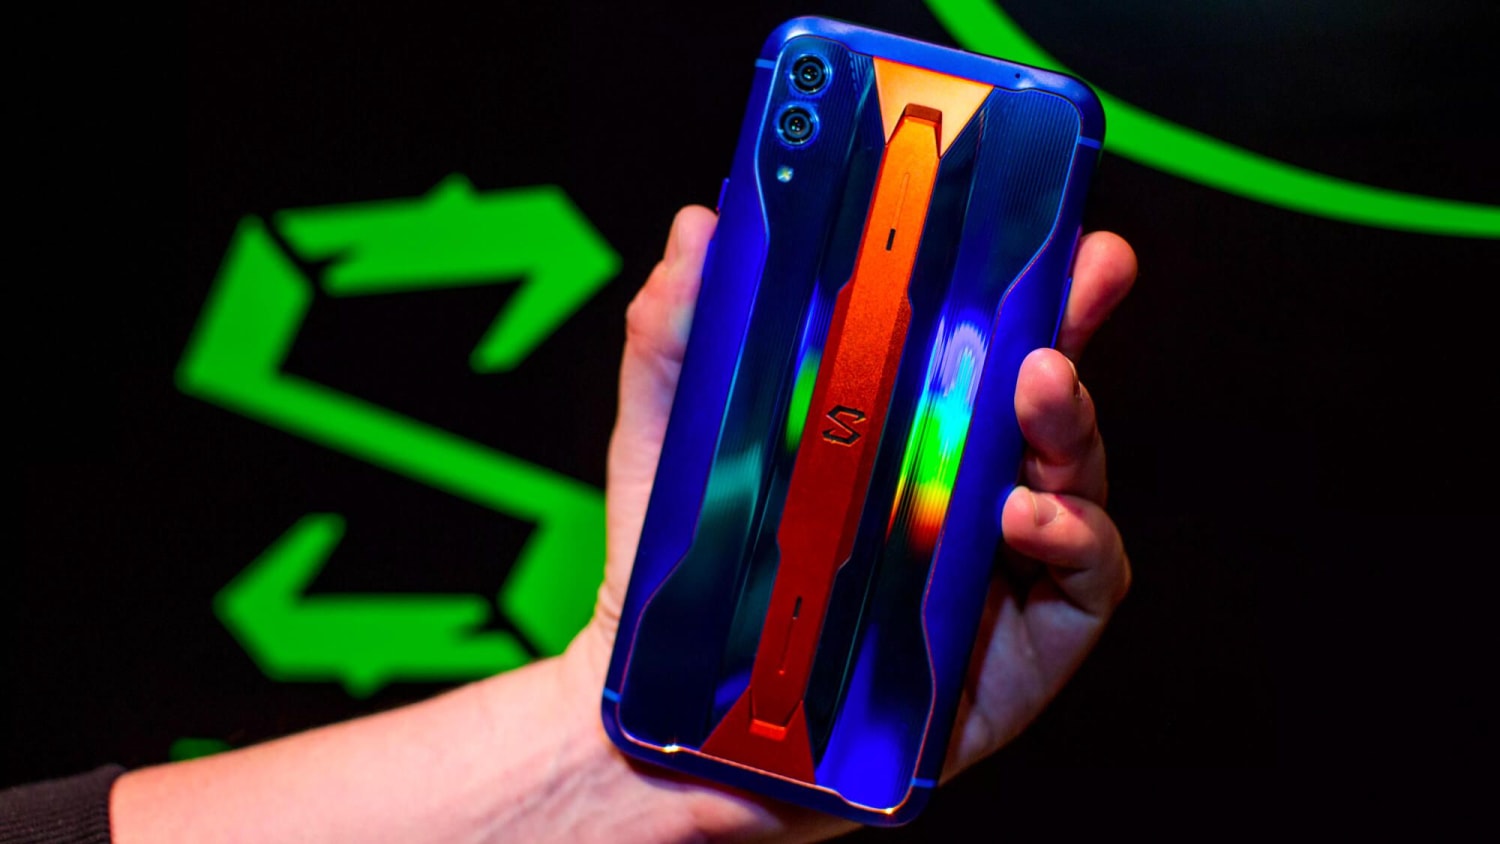 As gaming phones gain steam, the Black Shark 2 Pro could be the best yet